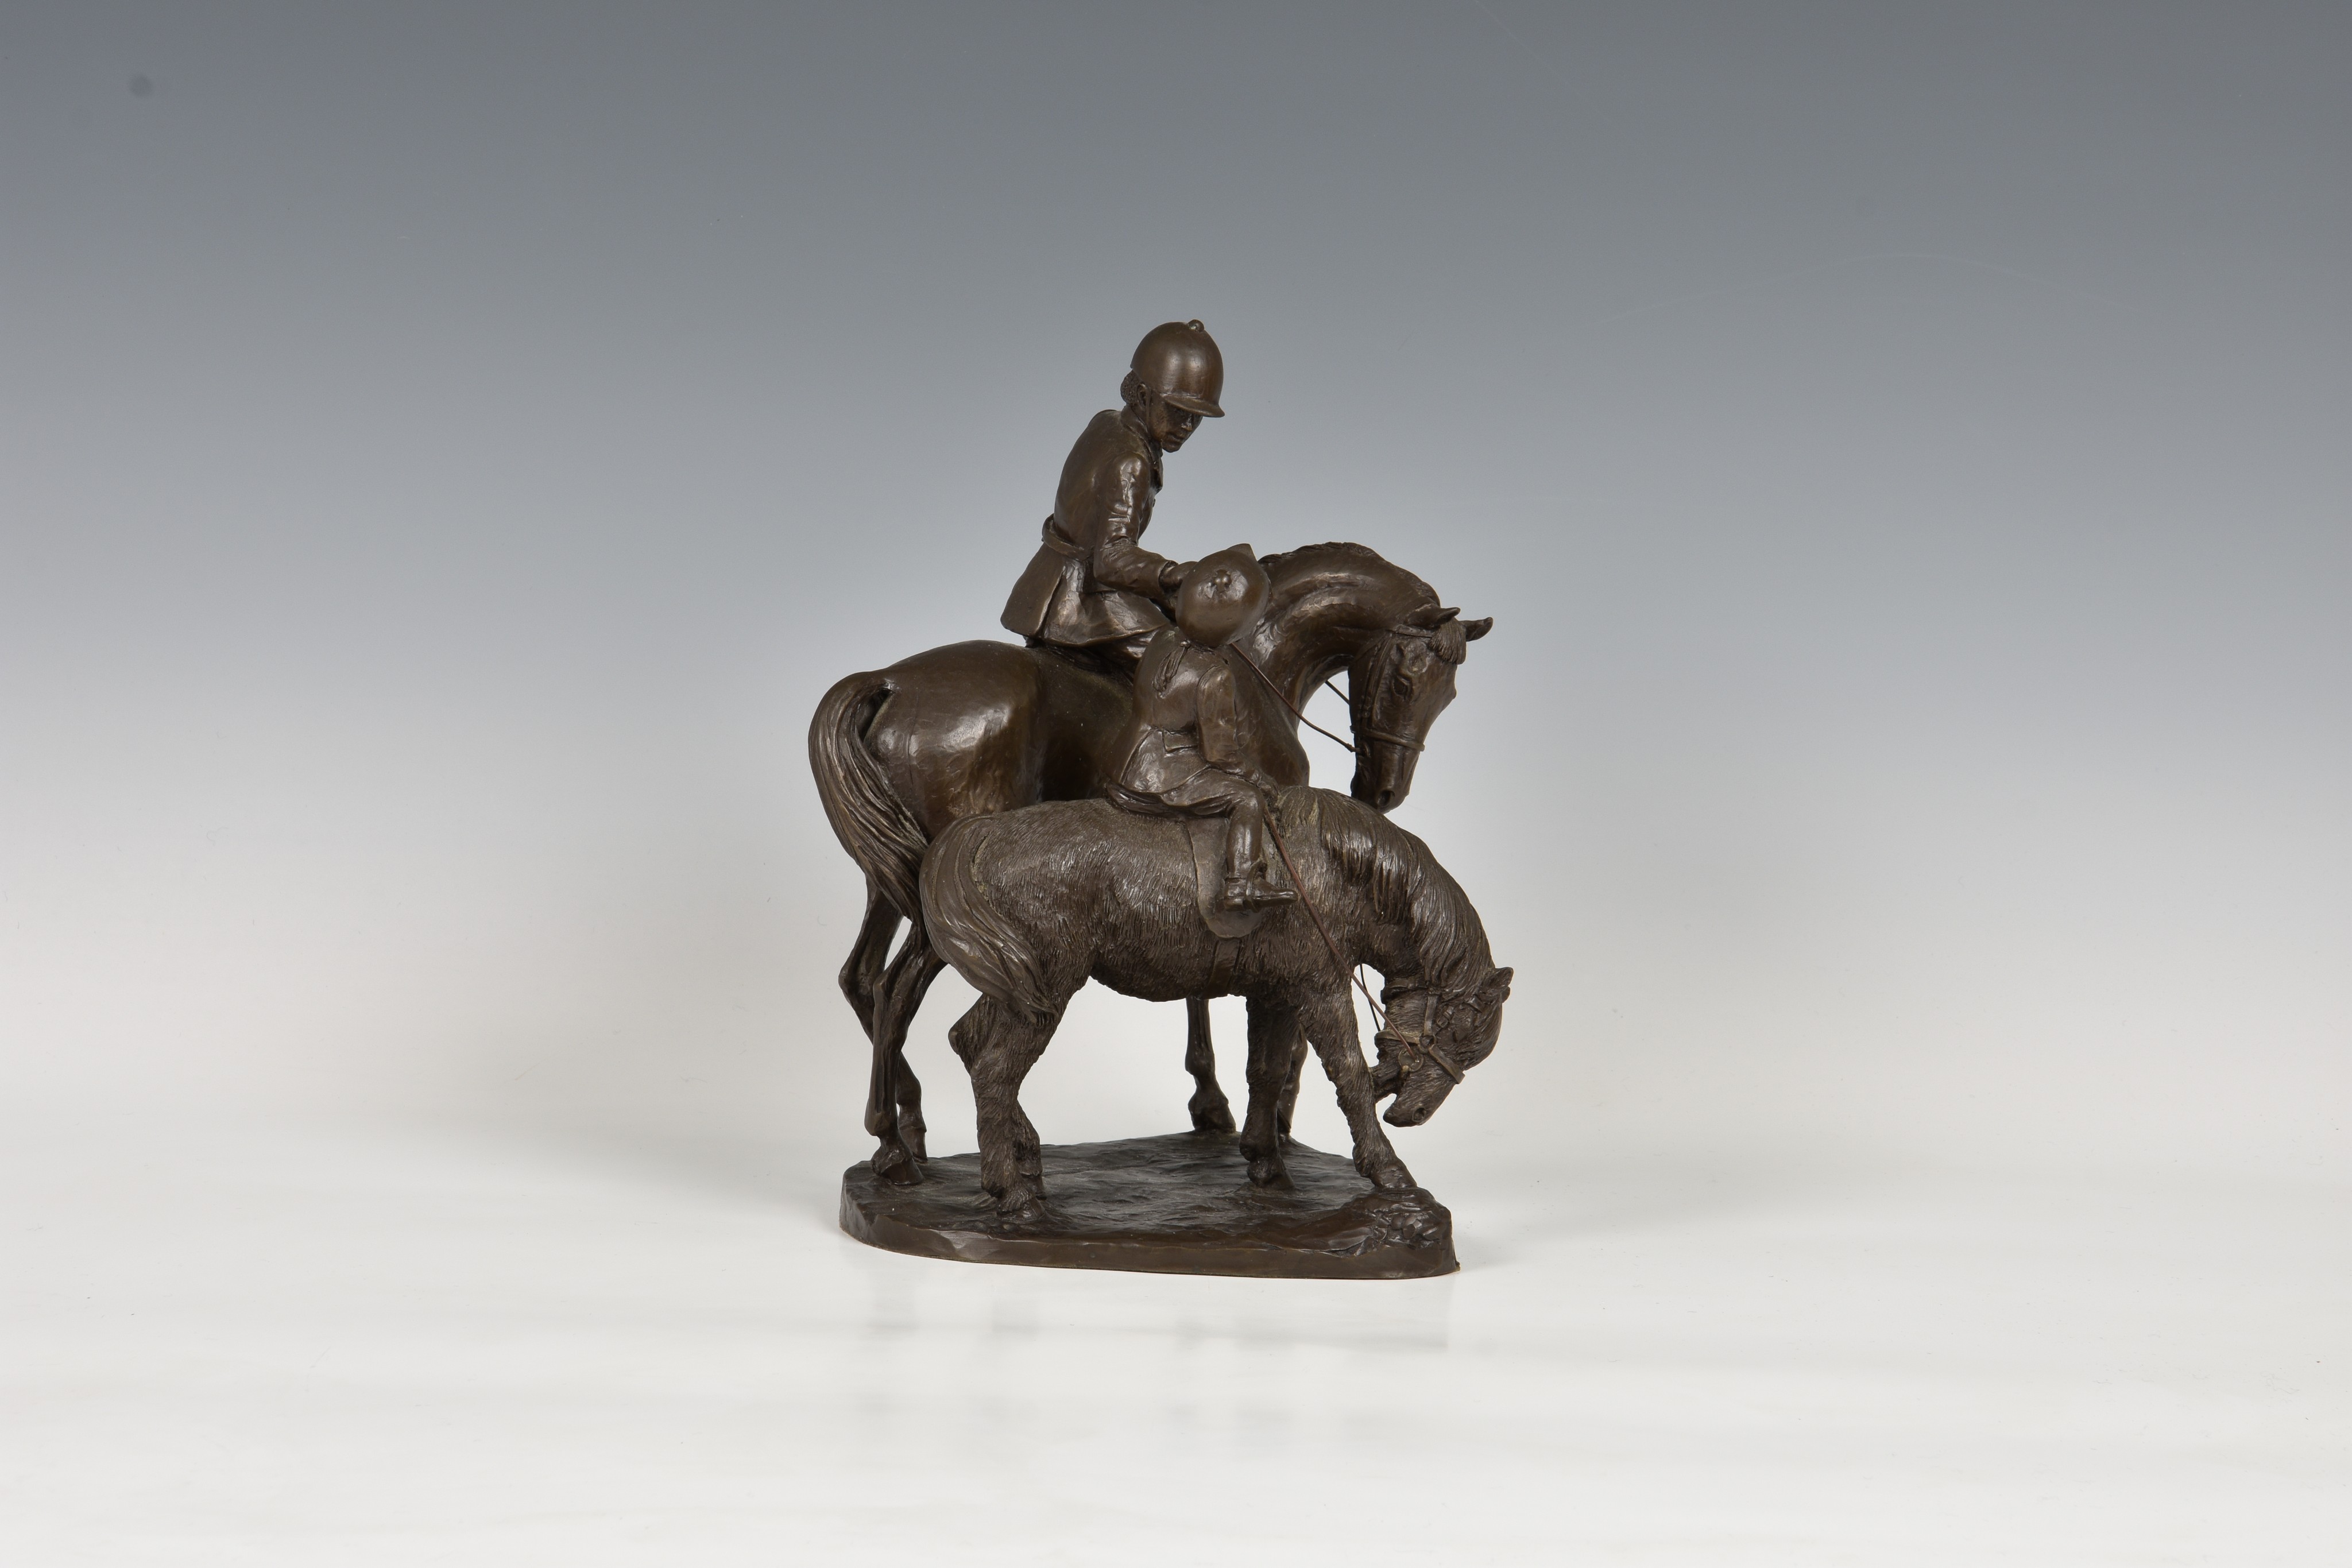 A Heredities limited edition bronzed resin equestrian figure group, signed David Geenty 99, - Image 2 of 4